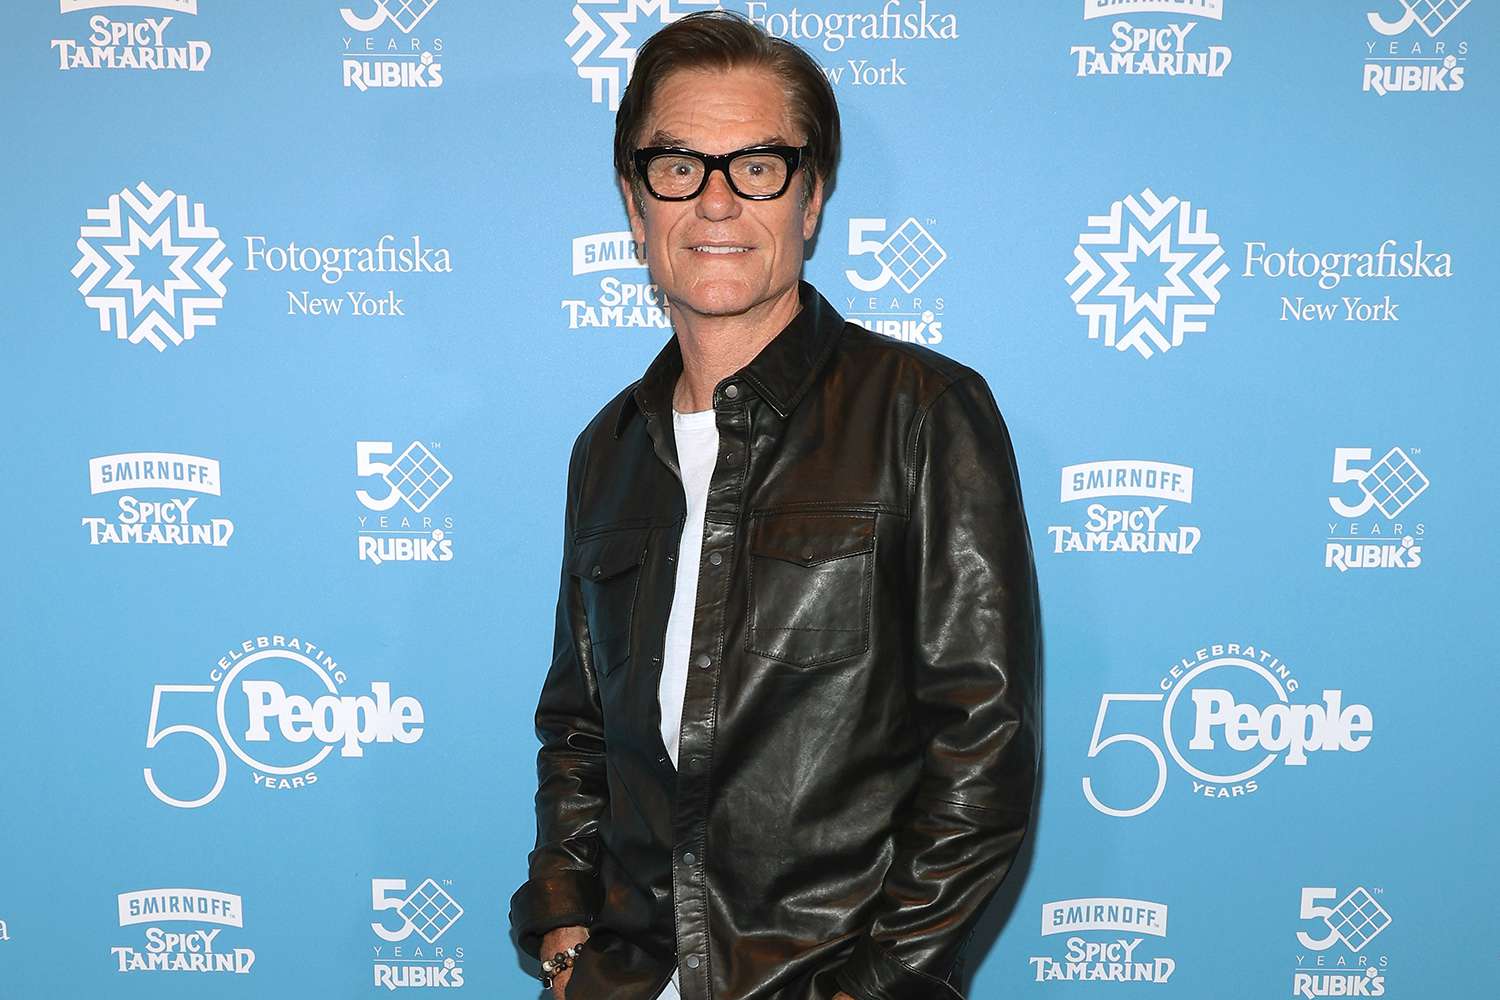  Harry Hamlin attends "PEOPLE: Celebrating 50 Years" Exhibition Opening